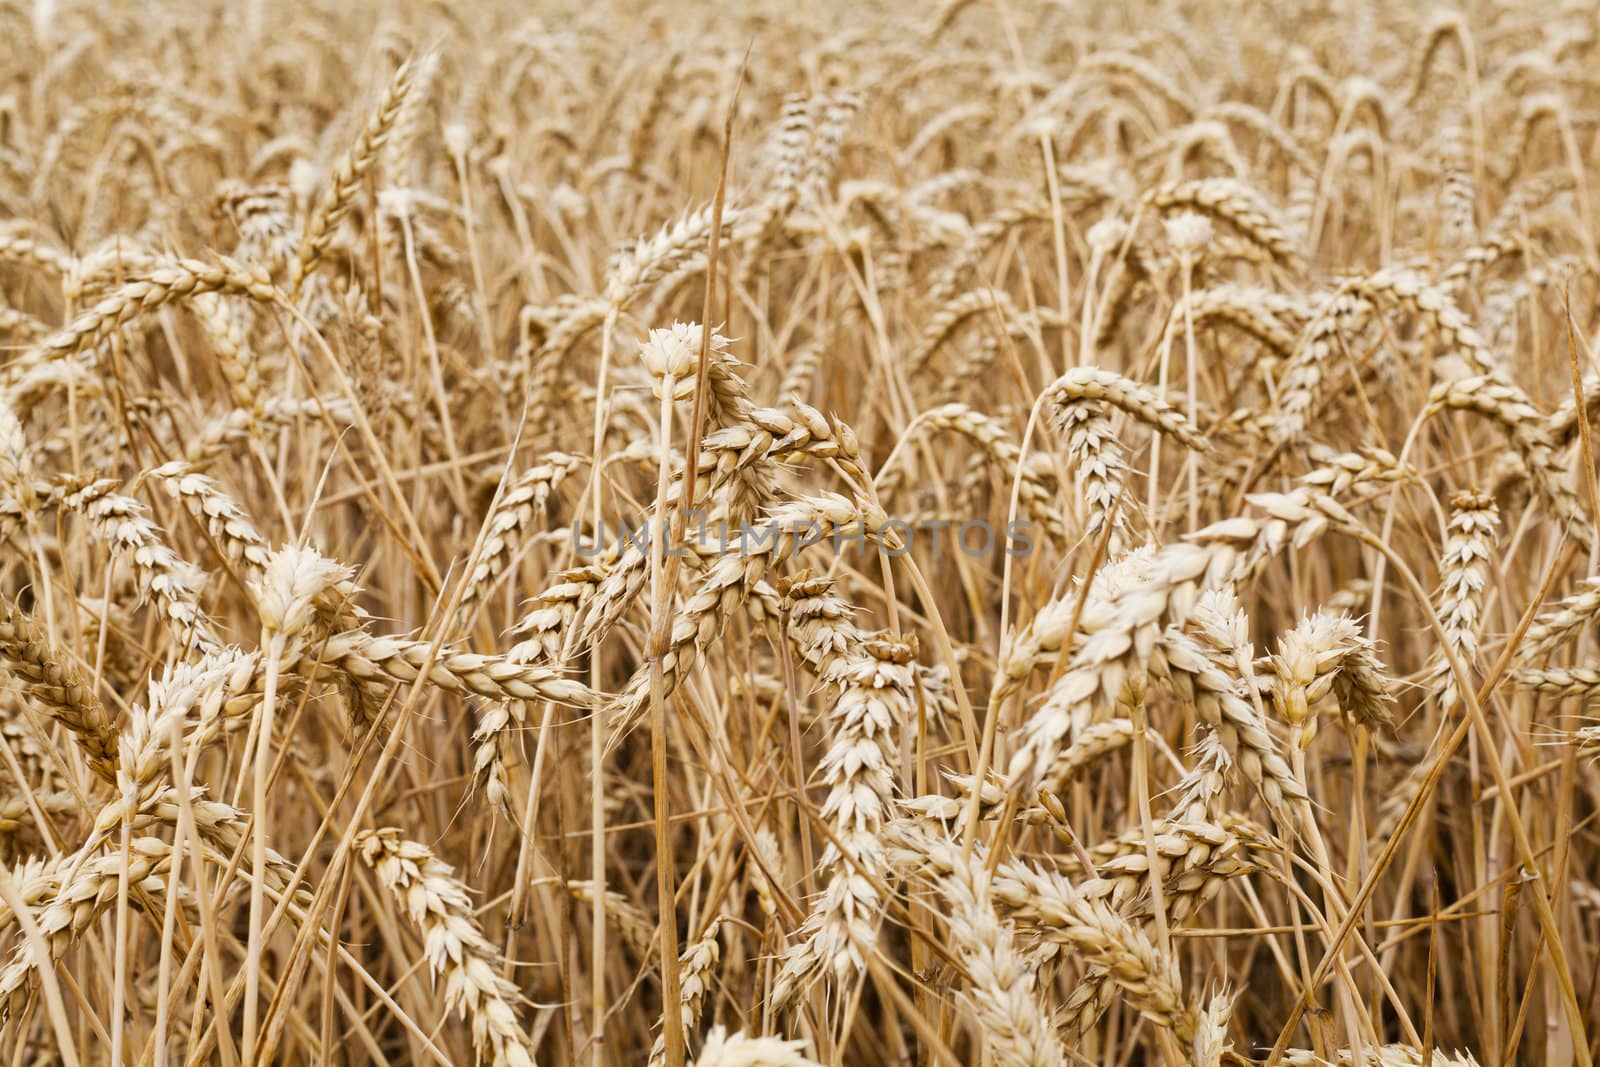 Background of wheat field to illustrate agriculture and the harvest season